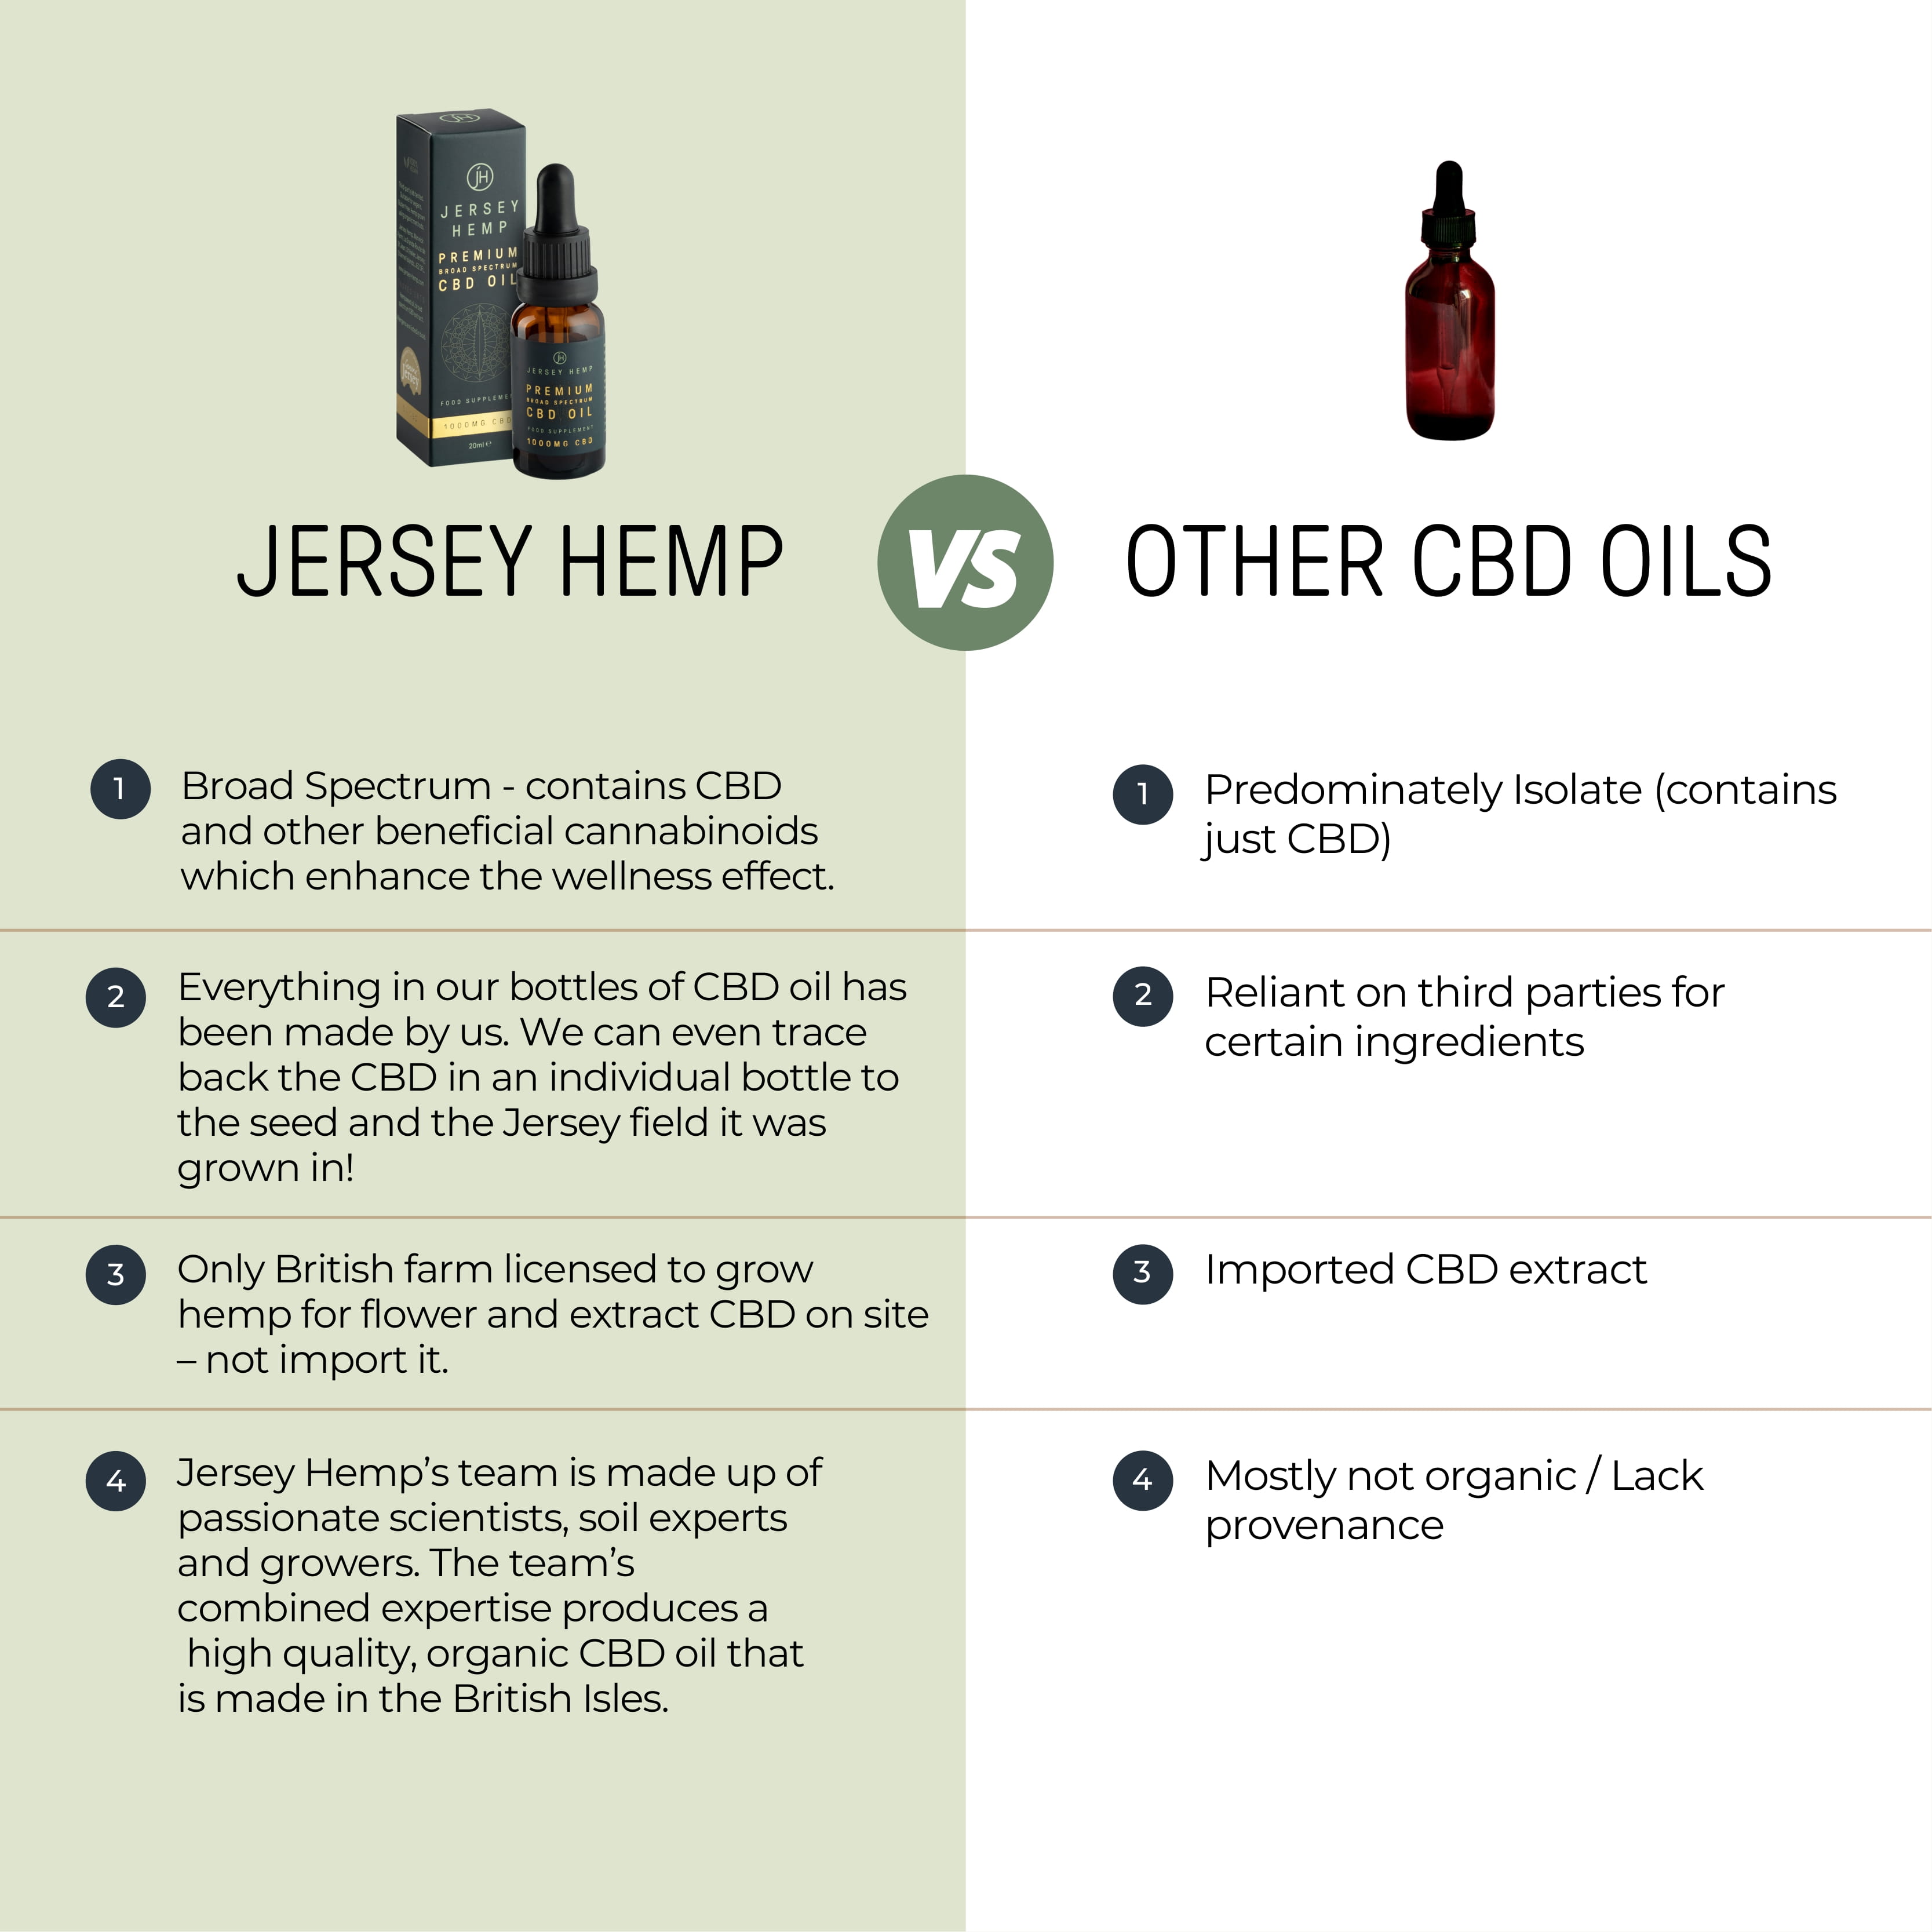  JERSEY HEMP PREMIUM BROAD SPECTRUM CBD OIL JERSEY HEMP FOOD SUPPLEME PREMIUM BROAD SPECTRUM CBD OIL 1000 MG CBD FOOD SUPPLEMENT 1000MG CBO 20ml e JERSEY HEMP VS OTHER CBD OILS 0 Broad Spectrum - contains CBD and other beneficial cannabinoids which enhance the wellness effect. Predominately Isolate (contains just CBD) Reliant on third parties for certain ingredients Everything in our bottles of CBD oil has been made by us. We can even trace back the CBD in an individual bottle to the seed and the Jersey field it was grown in! 3 Imported CBD extract Only British farm licensed to grow hemp for flower and extract CBD on site - not import it. 4 Mostly not organic / Lack provenance Jersey Hemp's team is made up of passionate scientists, soil experts and growers. The team's combined expertise produces a high quality, FULLY organic CBD oil that is made in the British Isles. 